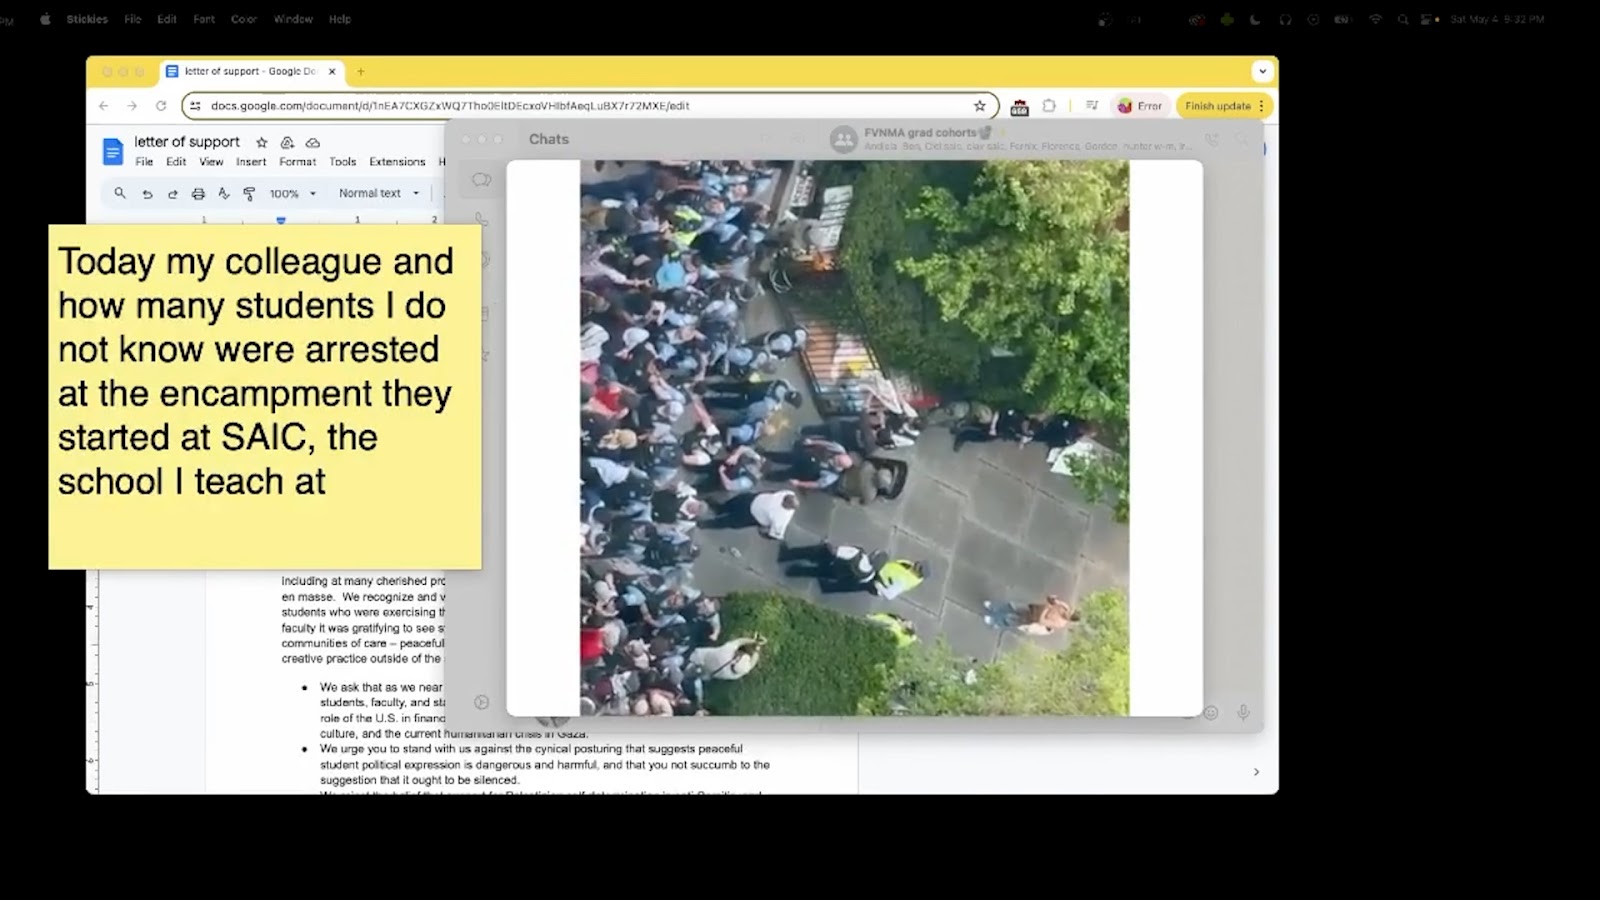 Image: Still from Claire Fleming Staples’ “The Master’s Feelings” at PS1 Close House. A screenshot of a desktop with a Google Document titled “letter of support” semi-visible. There is a yellow sticky note on the left side of the image that reads, “Today my colleague and how many students I do not know were arrested at the encampment they started at SAIC, the school I teach at.” A still image of the Chicago Police clearing the encampment at the Art Institute of Chicago’s North Garden hovers on the right side of the screen. Photo courtesy of the artist. 